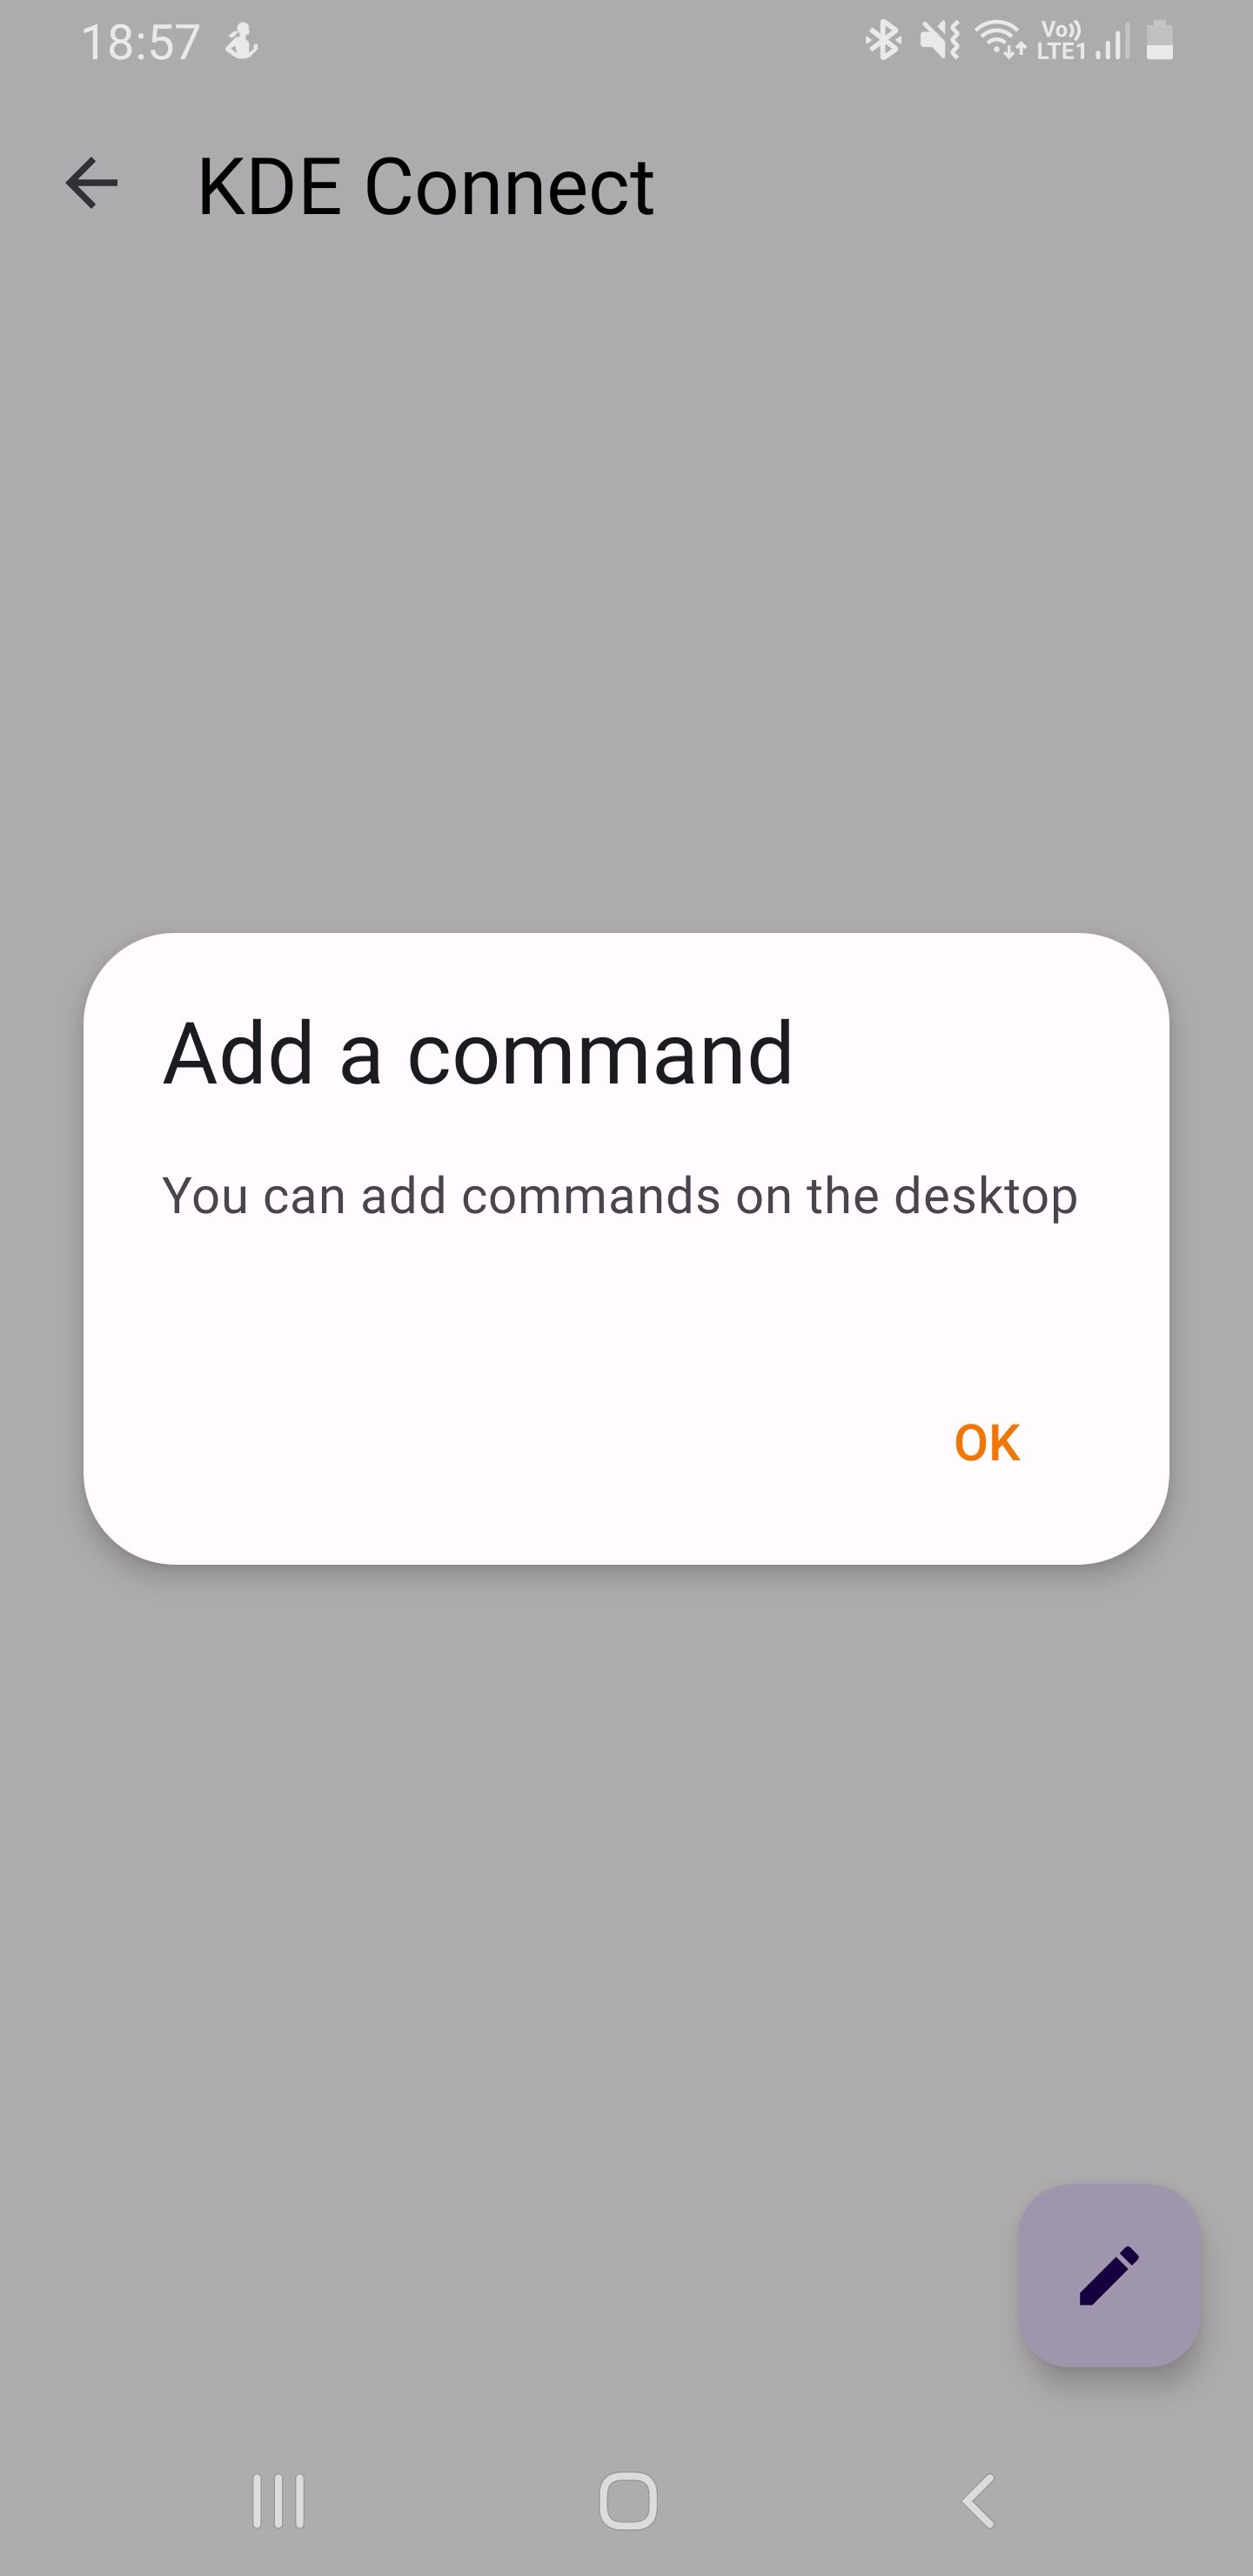 Add command prompt on KDE Connect